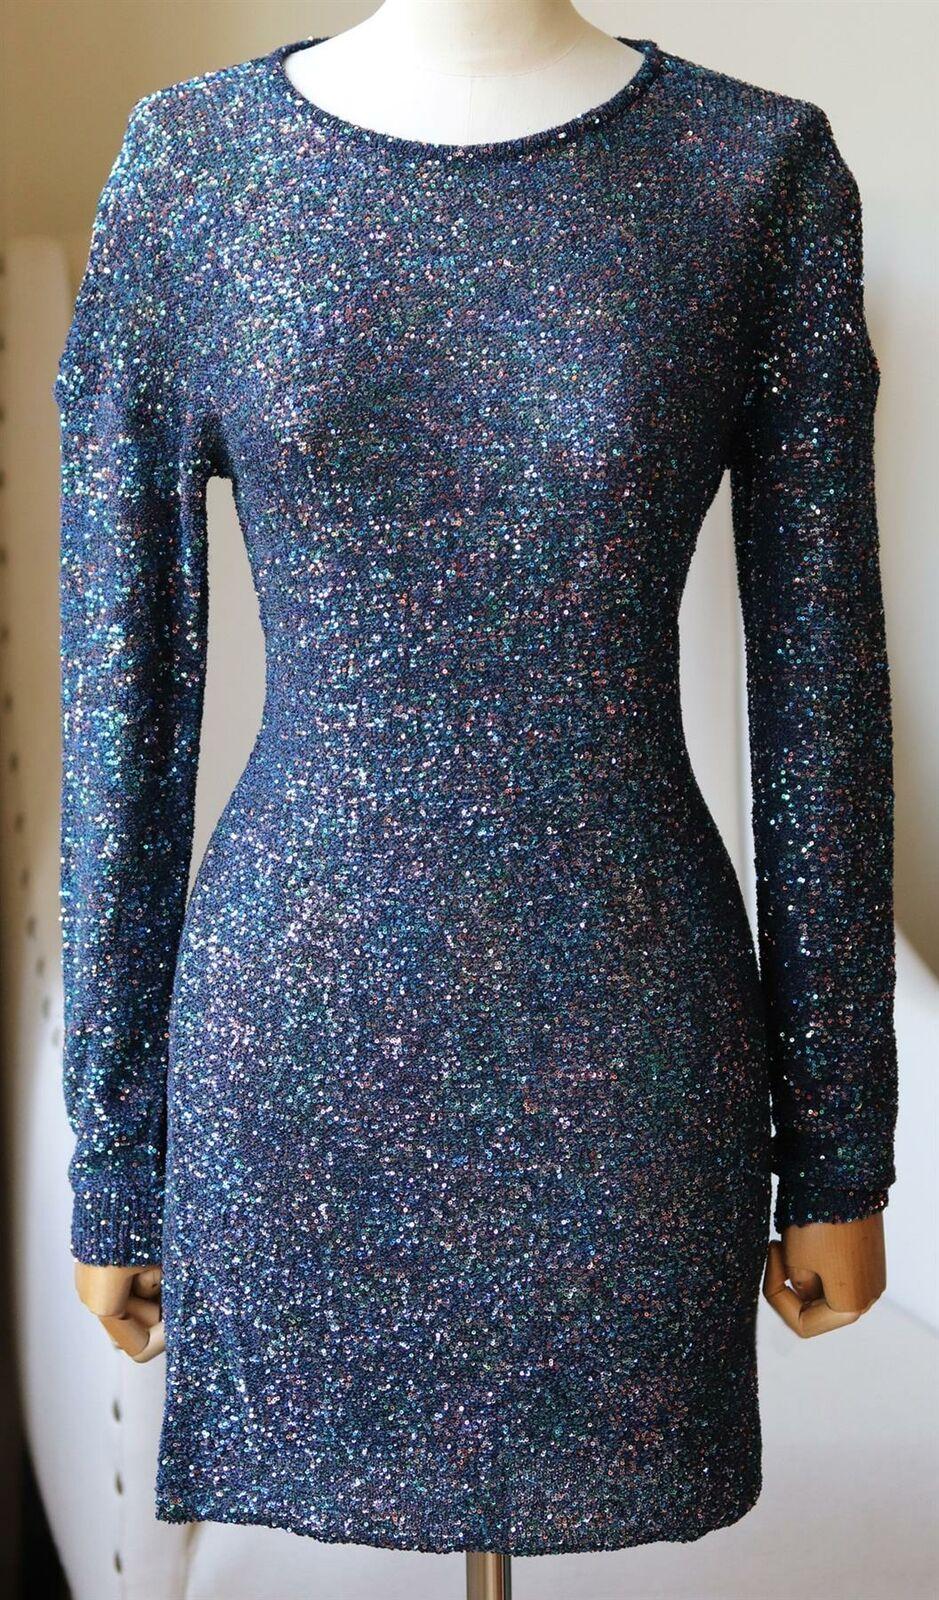 This Saint Laurent mini dress is decorated with colourful sequins that shimmer, it has been knitted in Italy from cobalt-blue yarns and has a figure-skimming silhouette with dropped shoulders and a particularly short hem.
Blue sequined